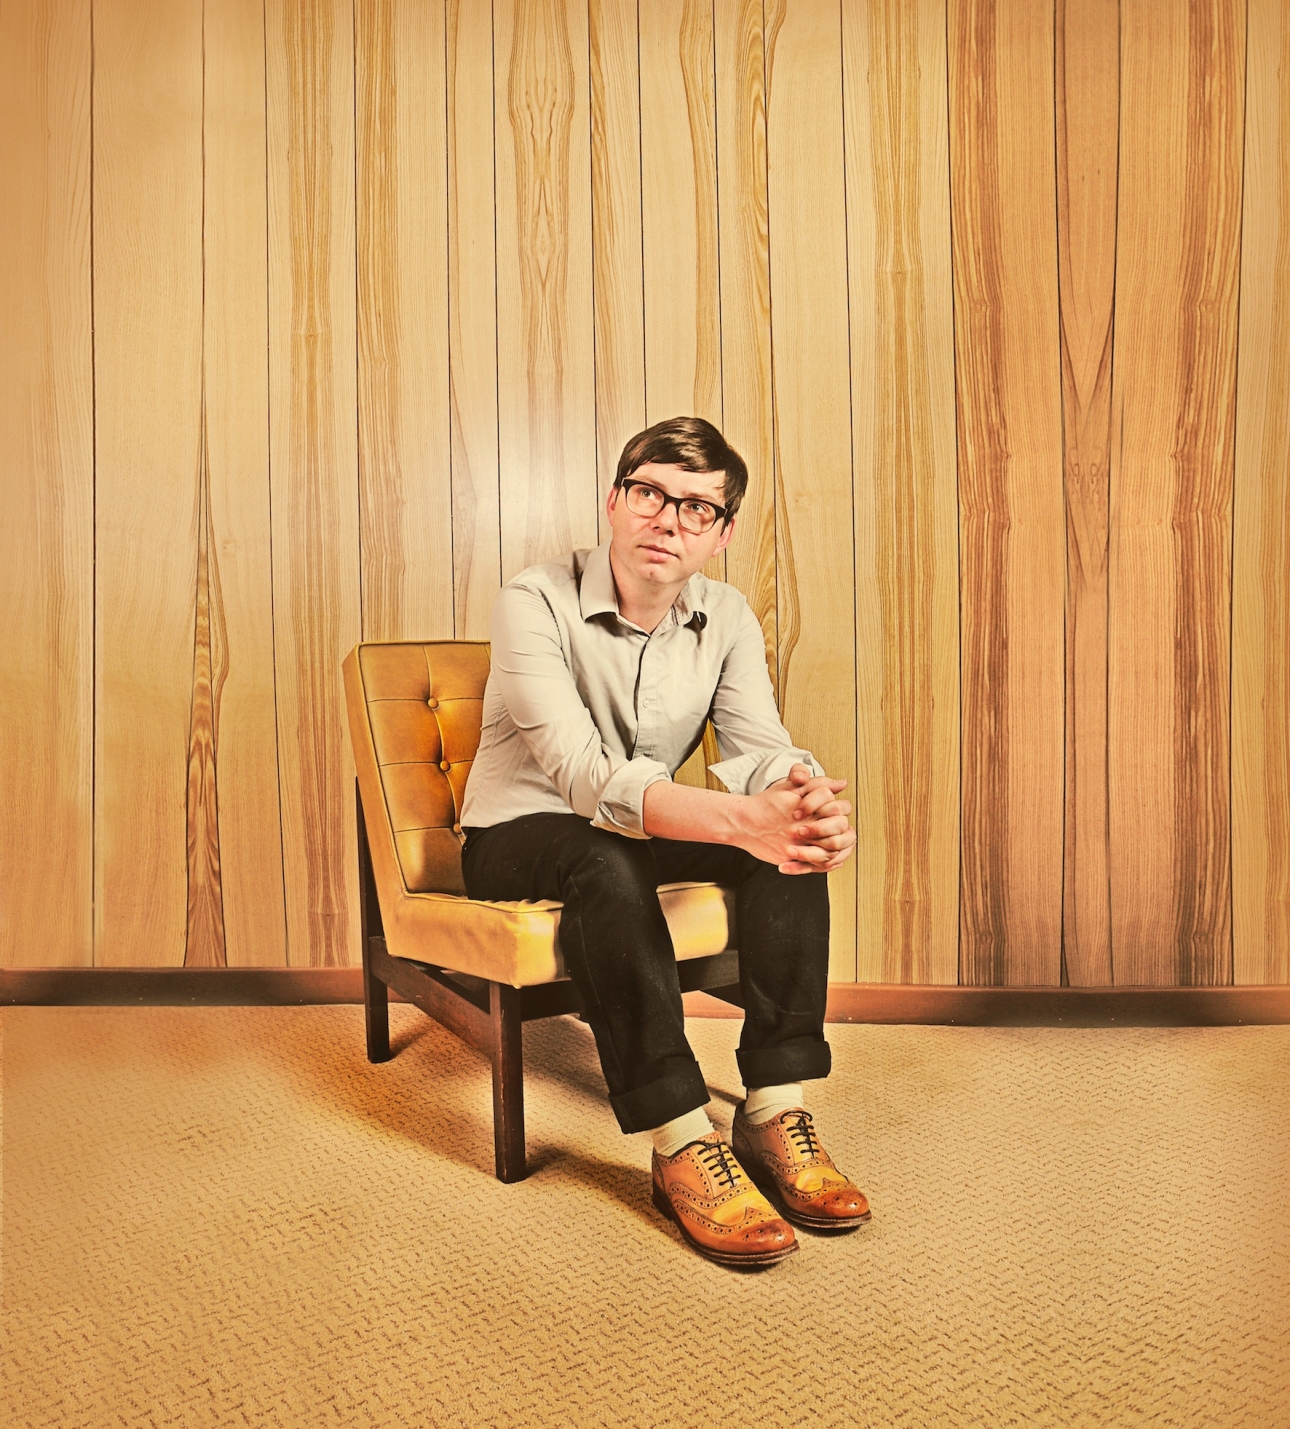 Sweet Baboo shares new music video "You Got Me Time Keeping" .